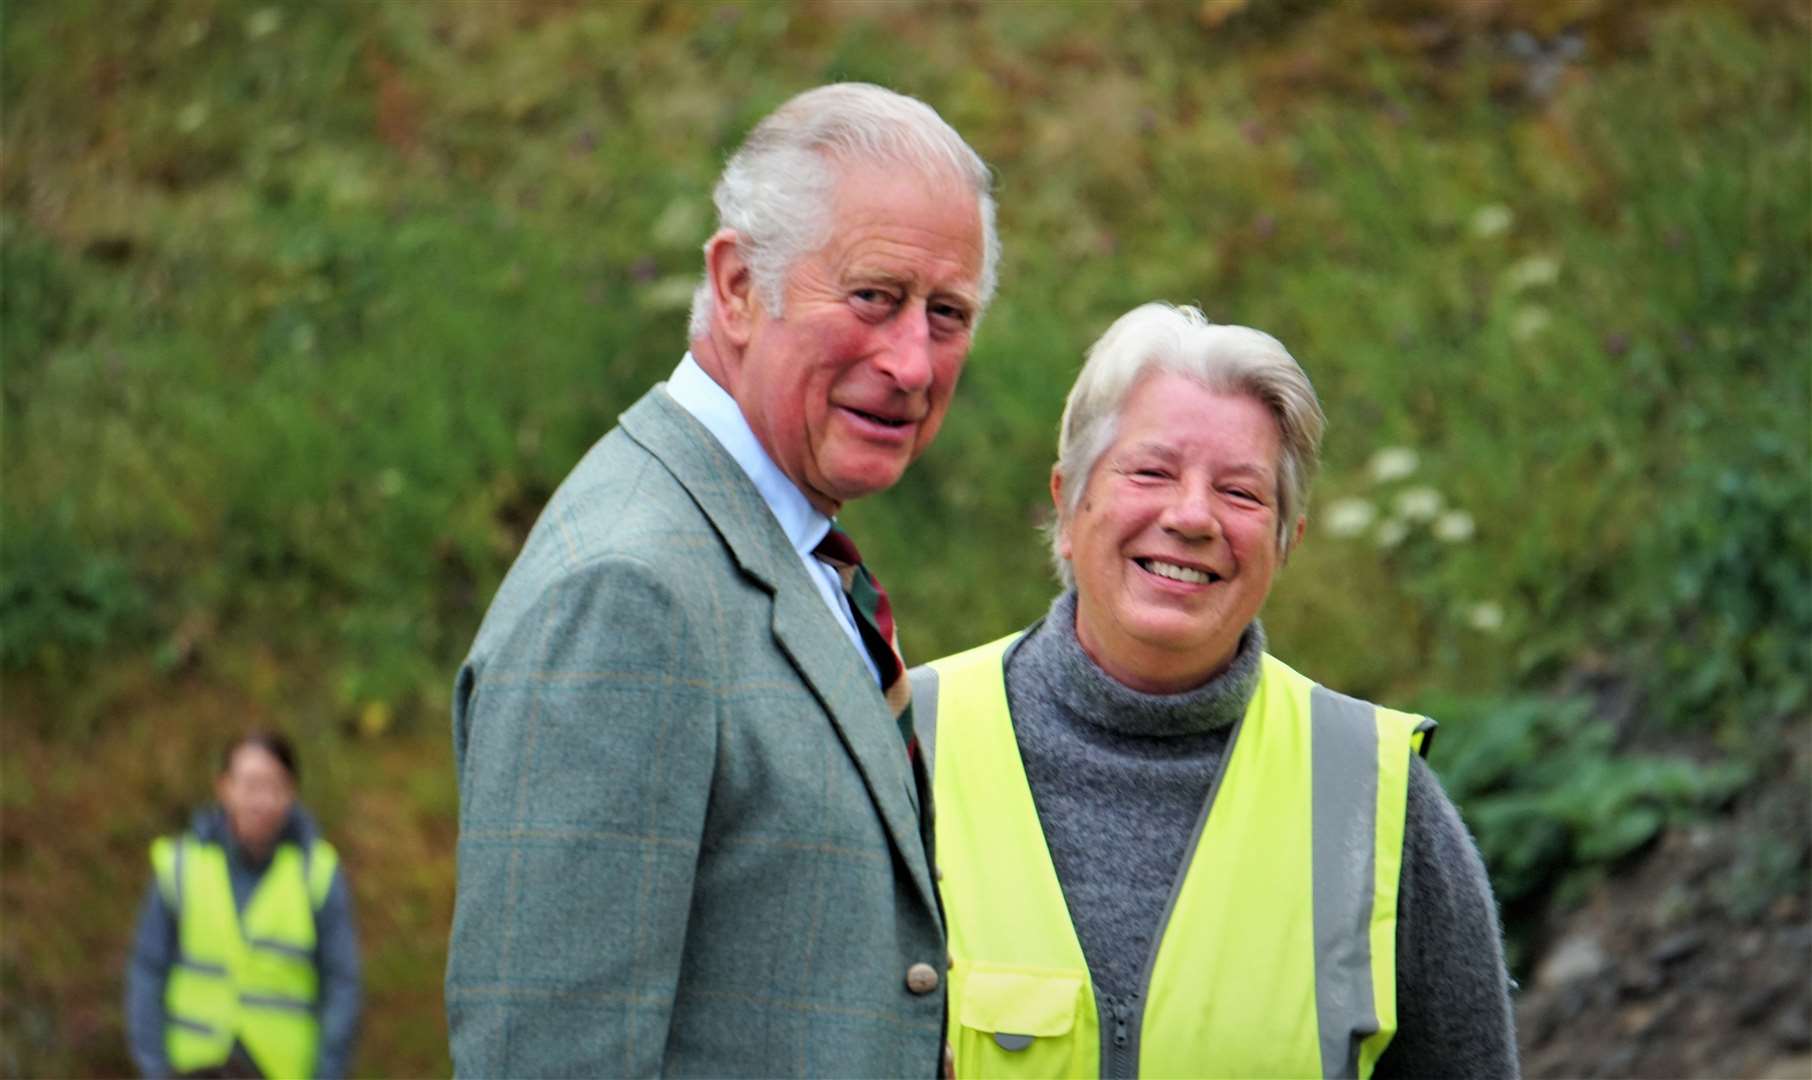 Dorcas Sinclair, founder of Caithness Beach Cleans, meeting the future King at Scrabster in 2021. Picture: DGS